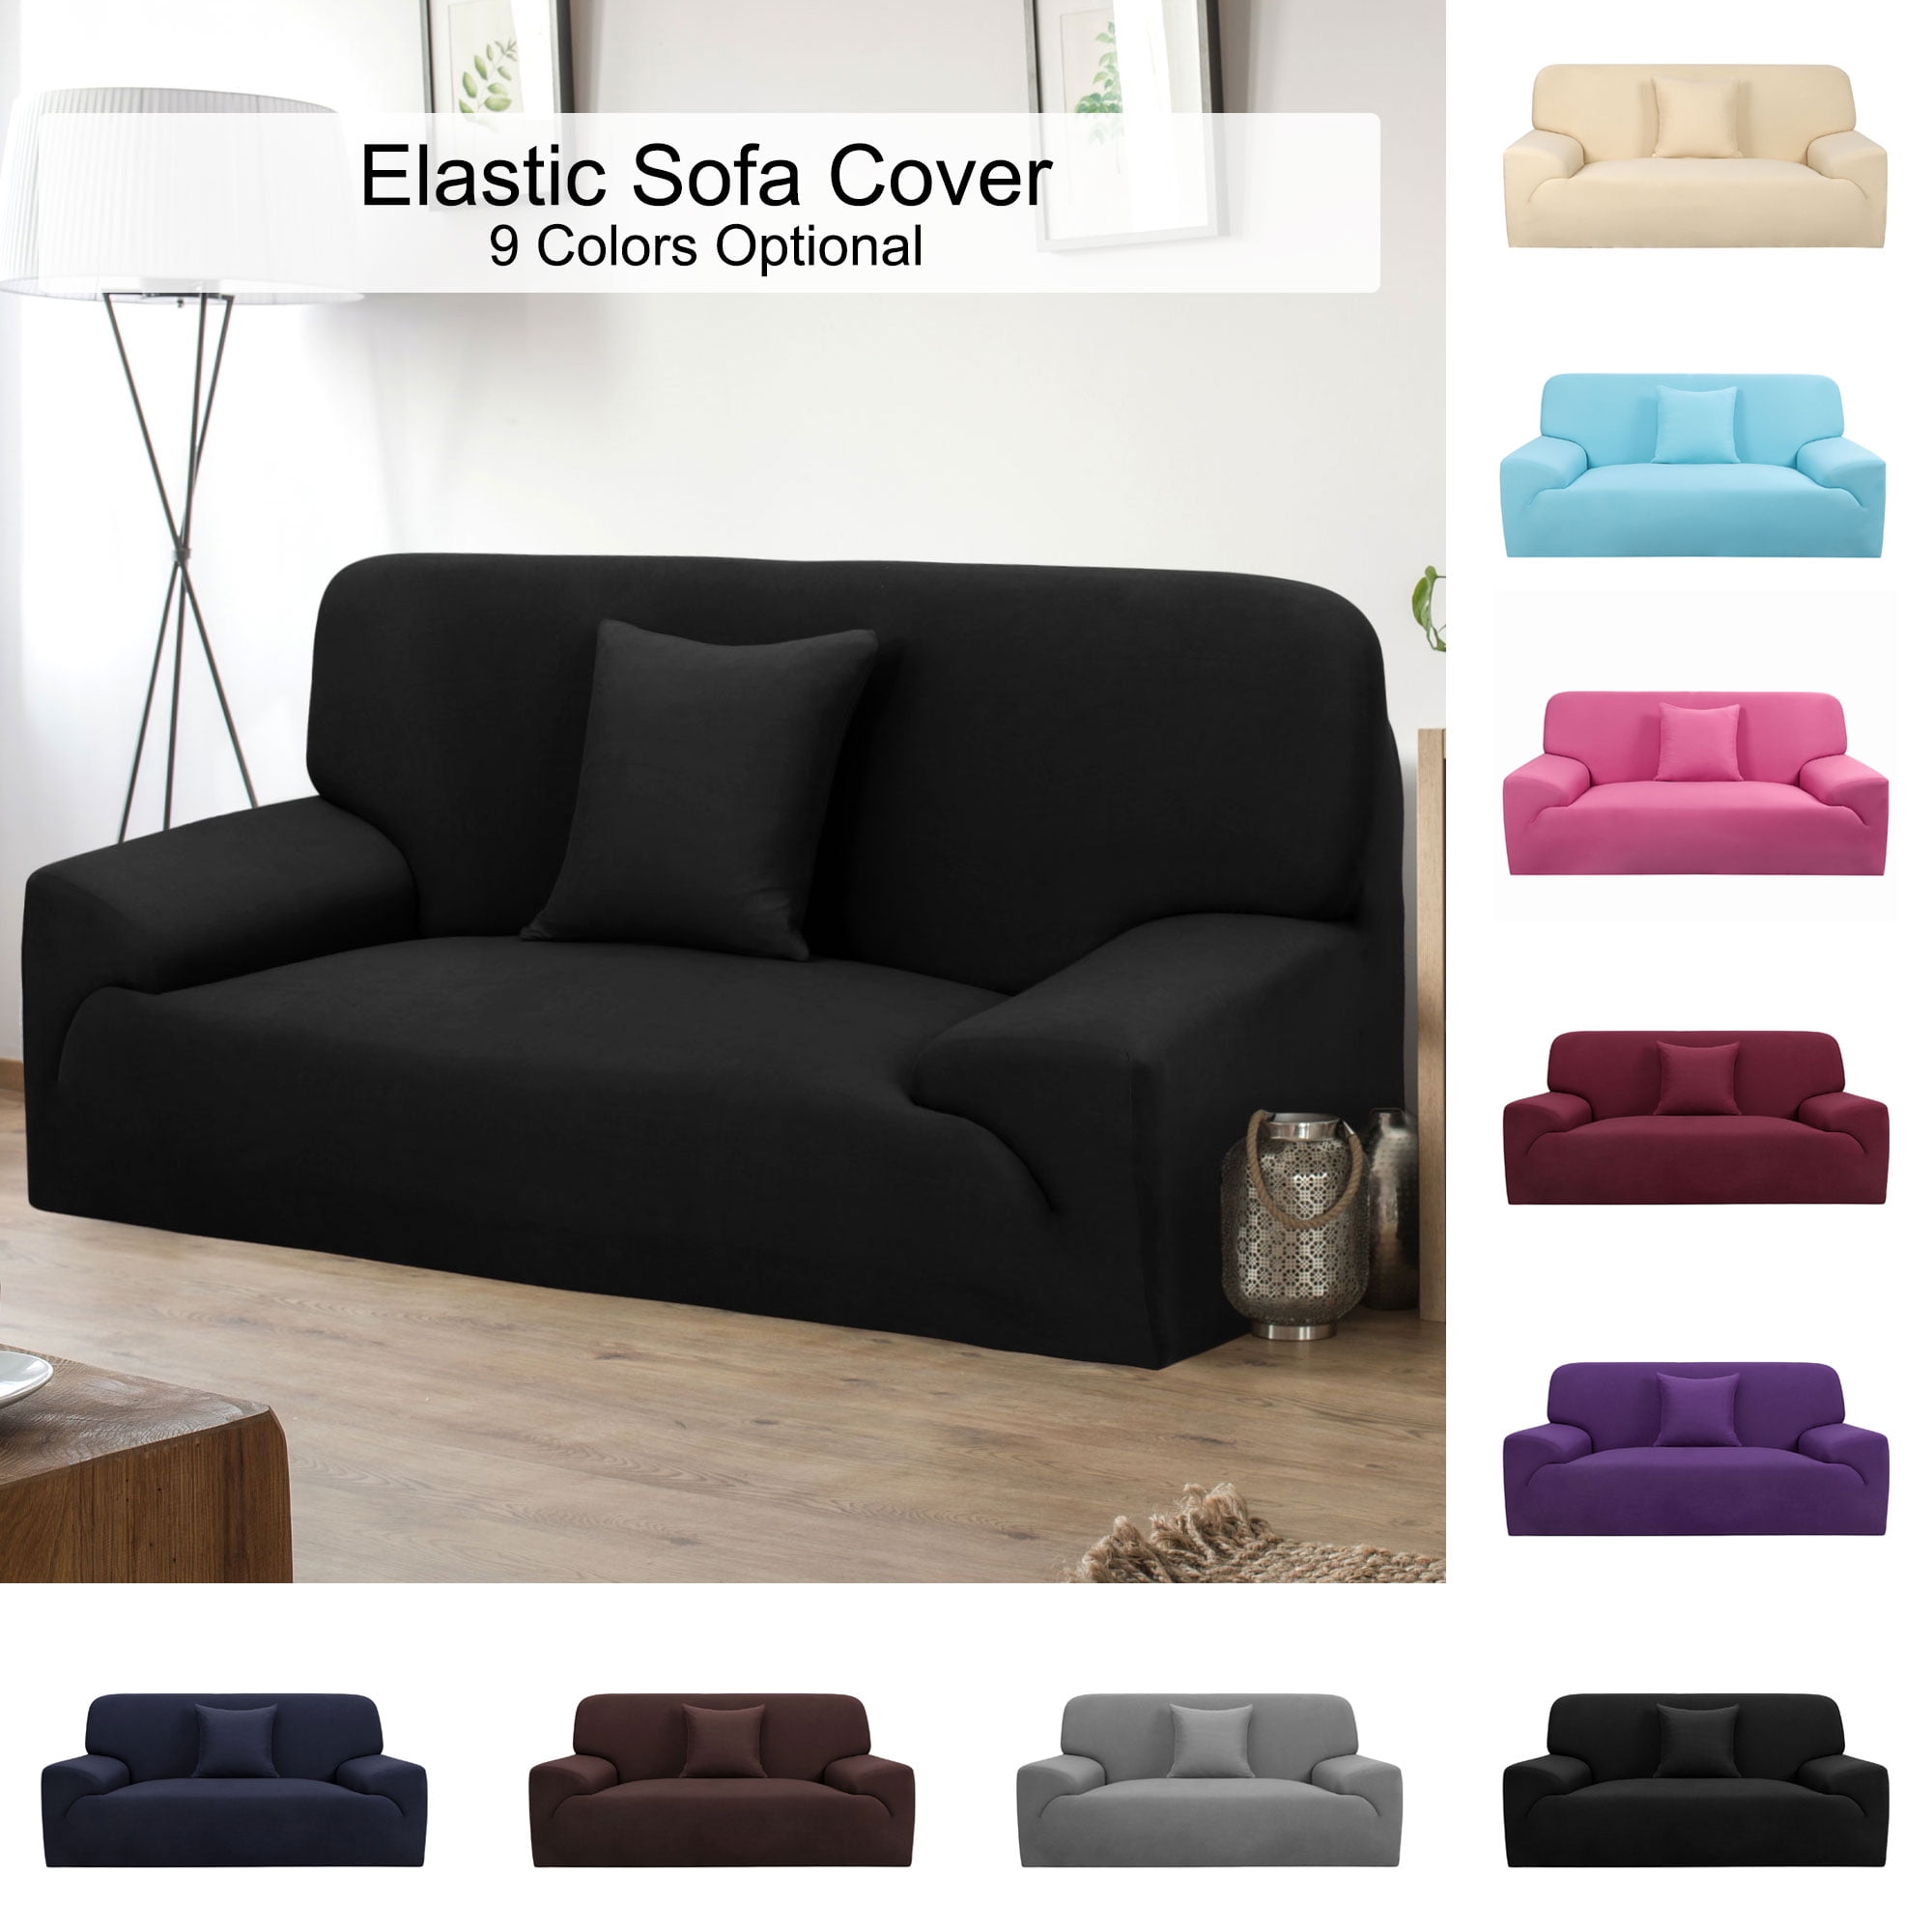 Details about   Elastic STRETCH Waterproof SOFA COVERS Slipcover Protector Settee 1/2/3/4 Seater 